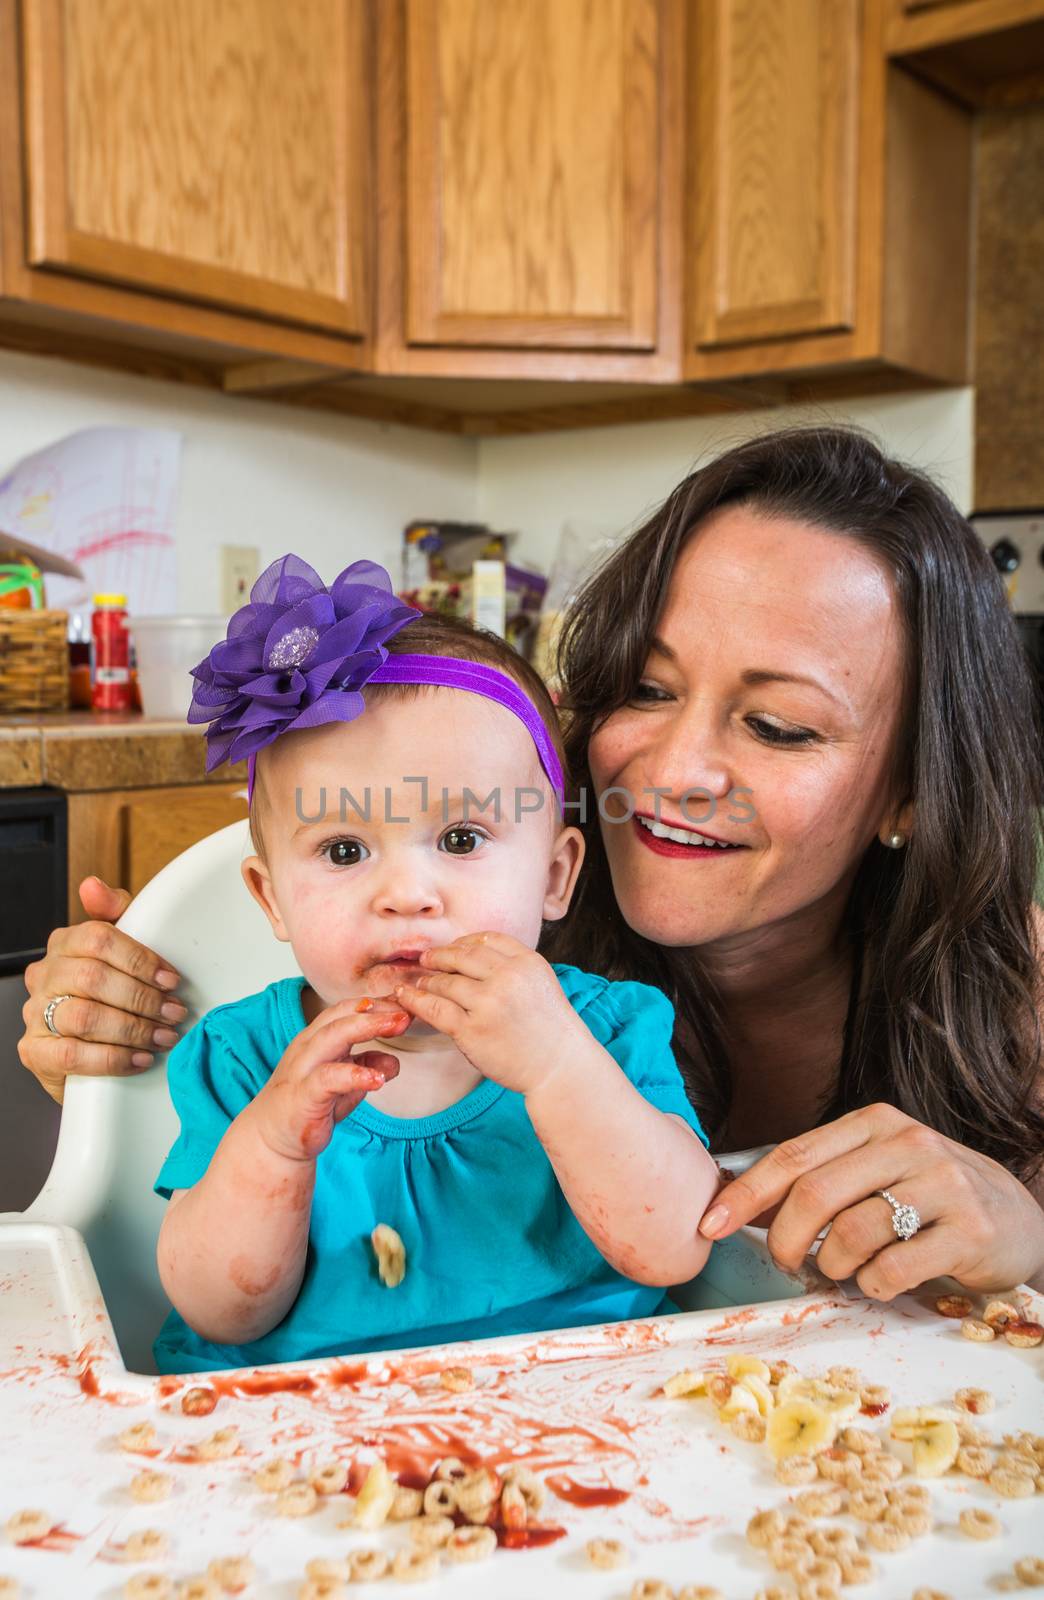 Mother in messy kitchen smiles as baby eats